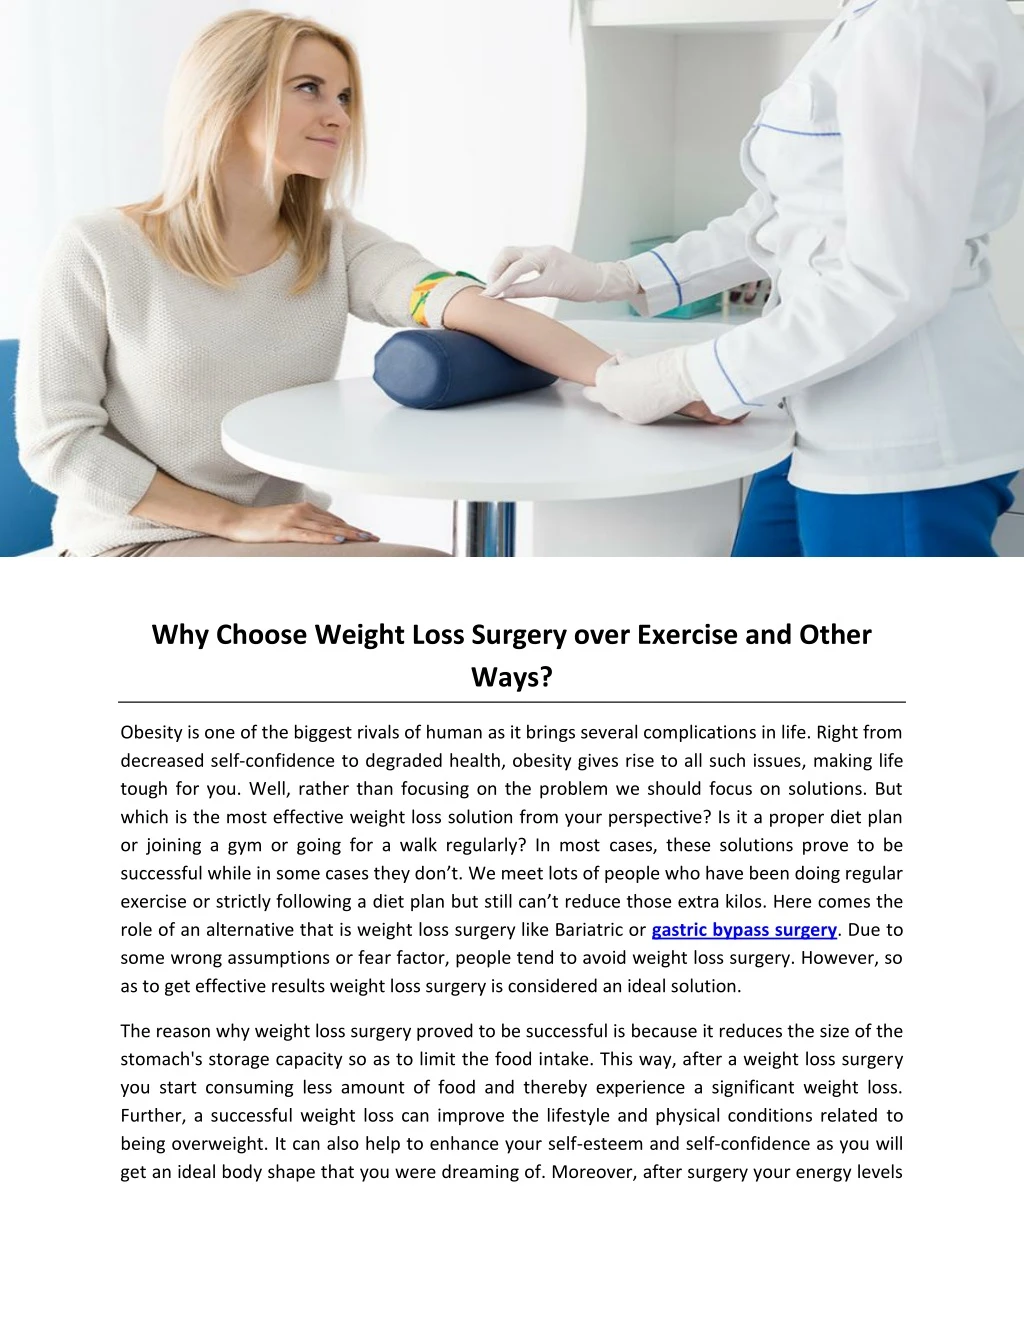 why choose weight loss surgery over exercise